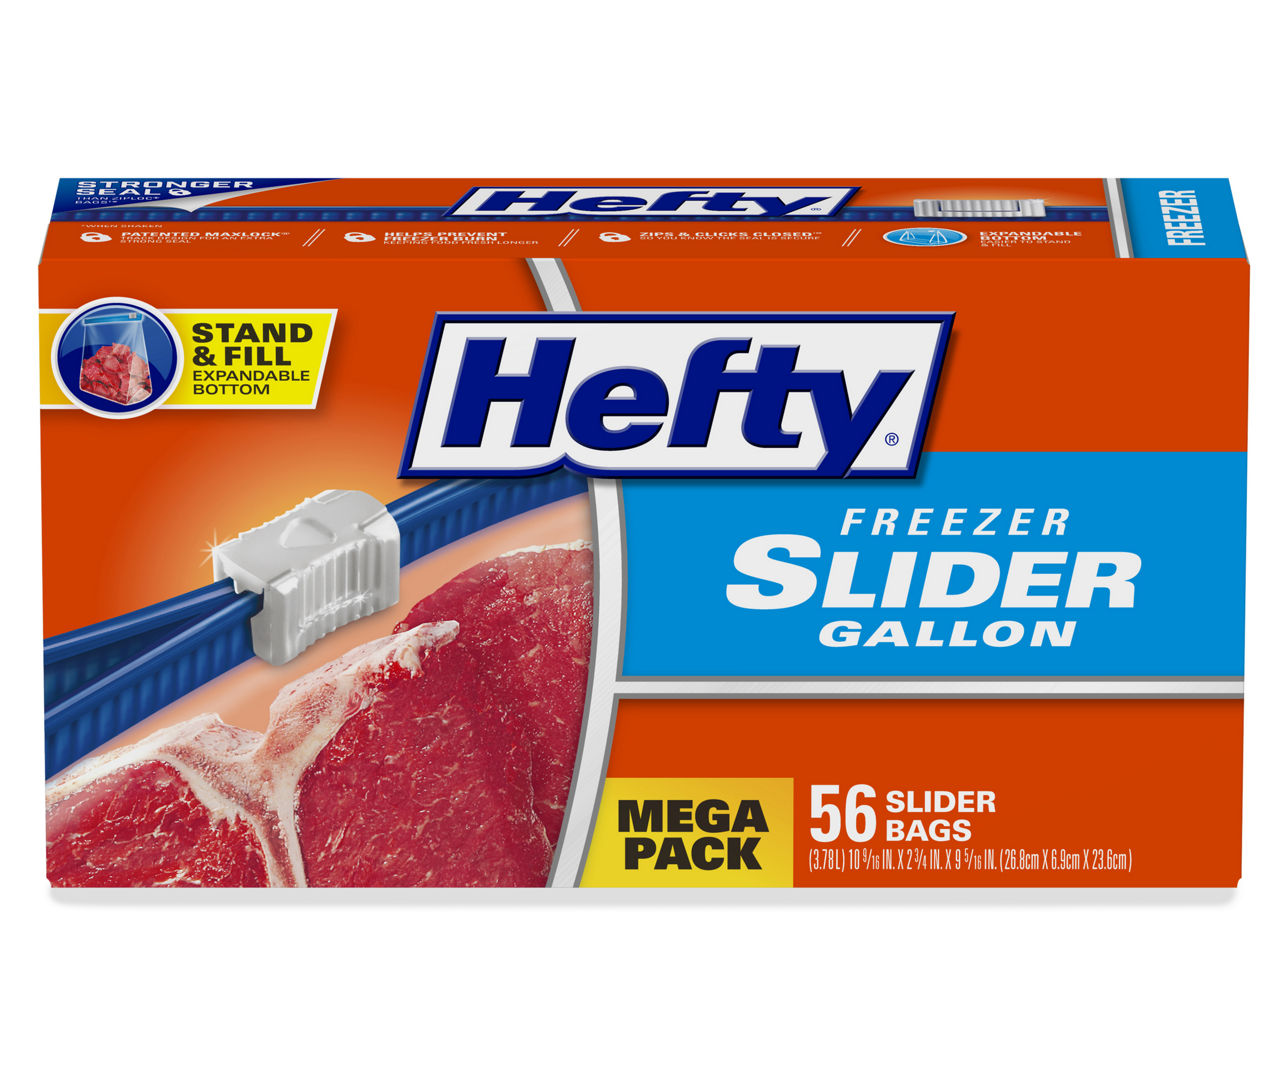 Hefty Slider Bags, Storage, Gallon, Value Pack - 30 bags